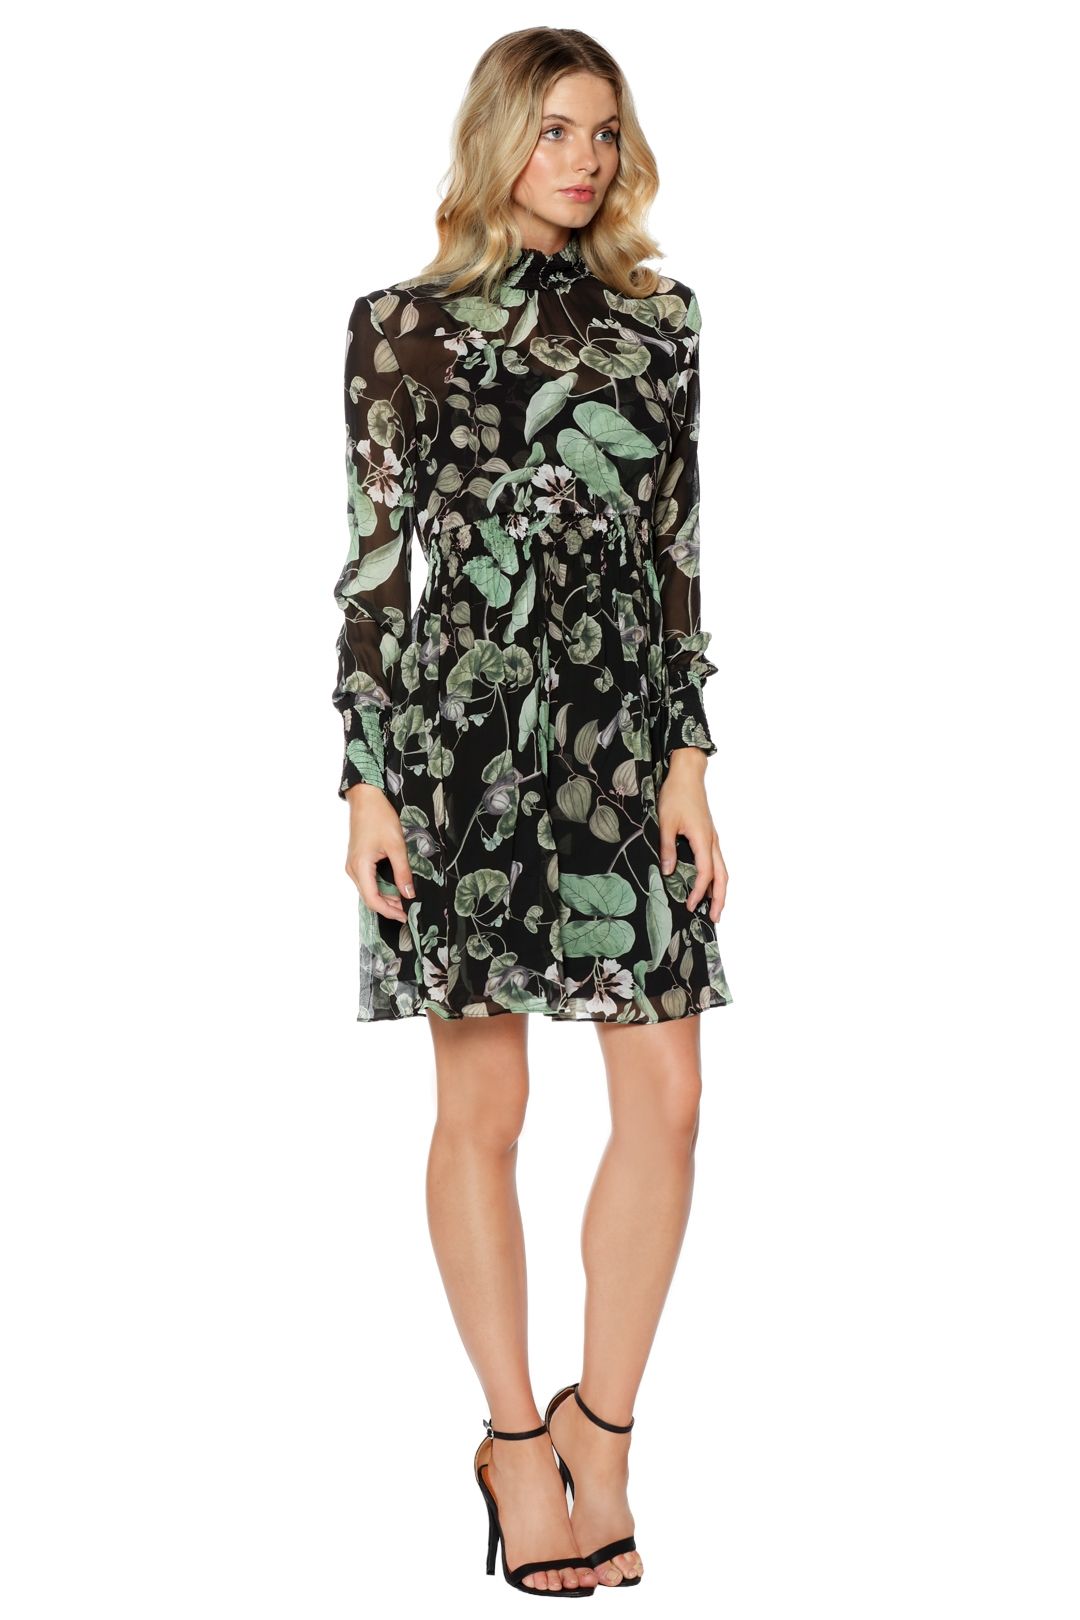 Thurley - Snap Dragon Print Dress - Green Floral - Side